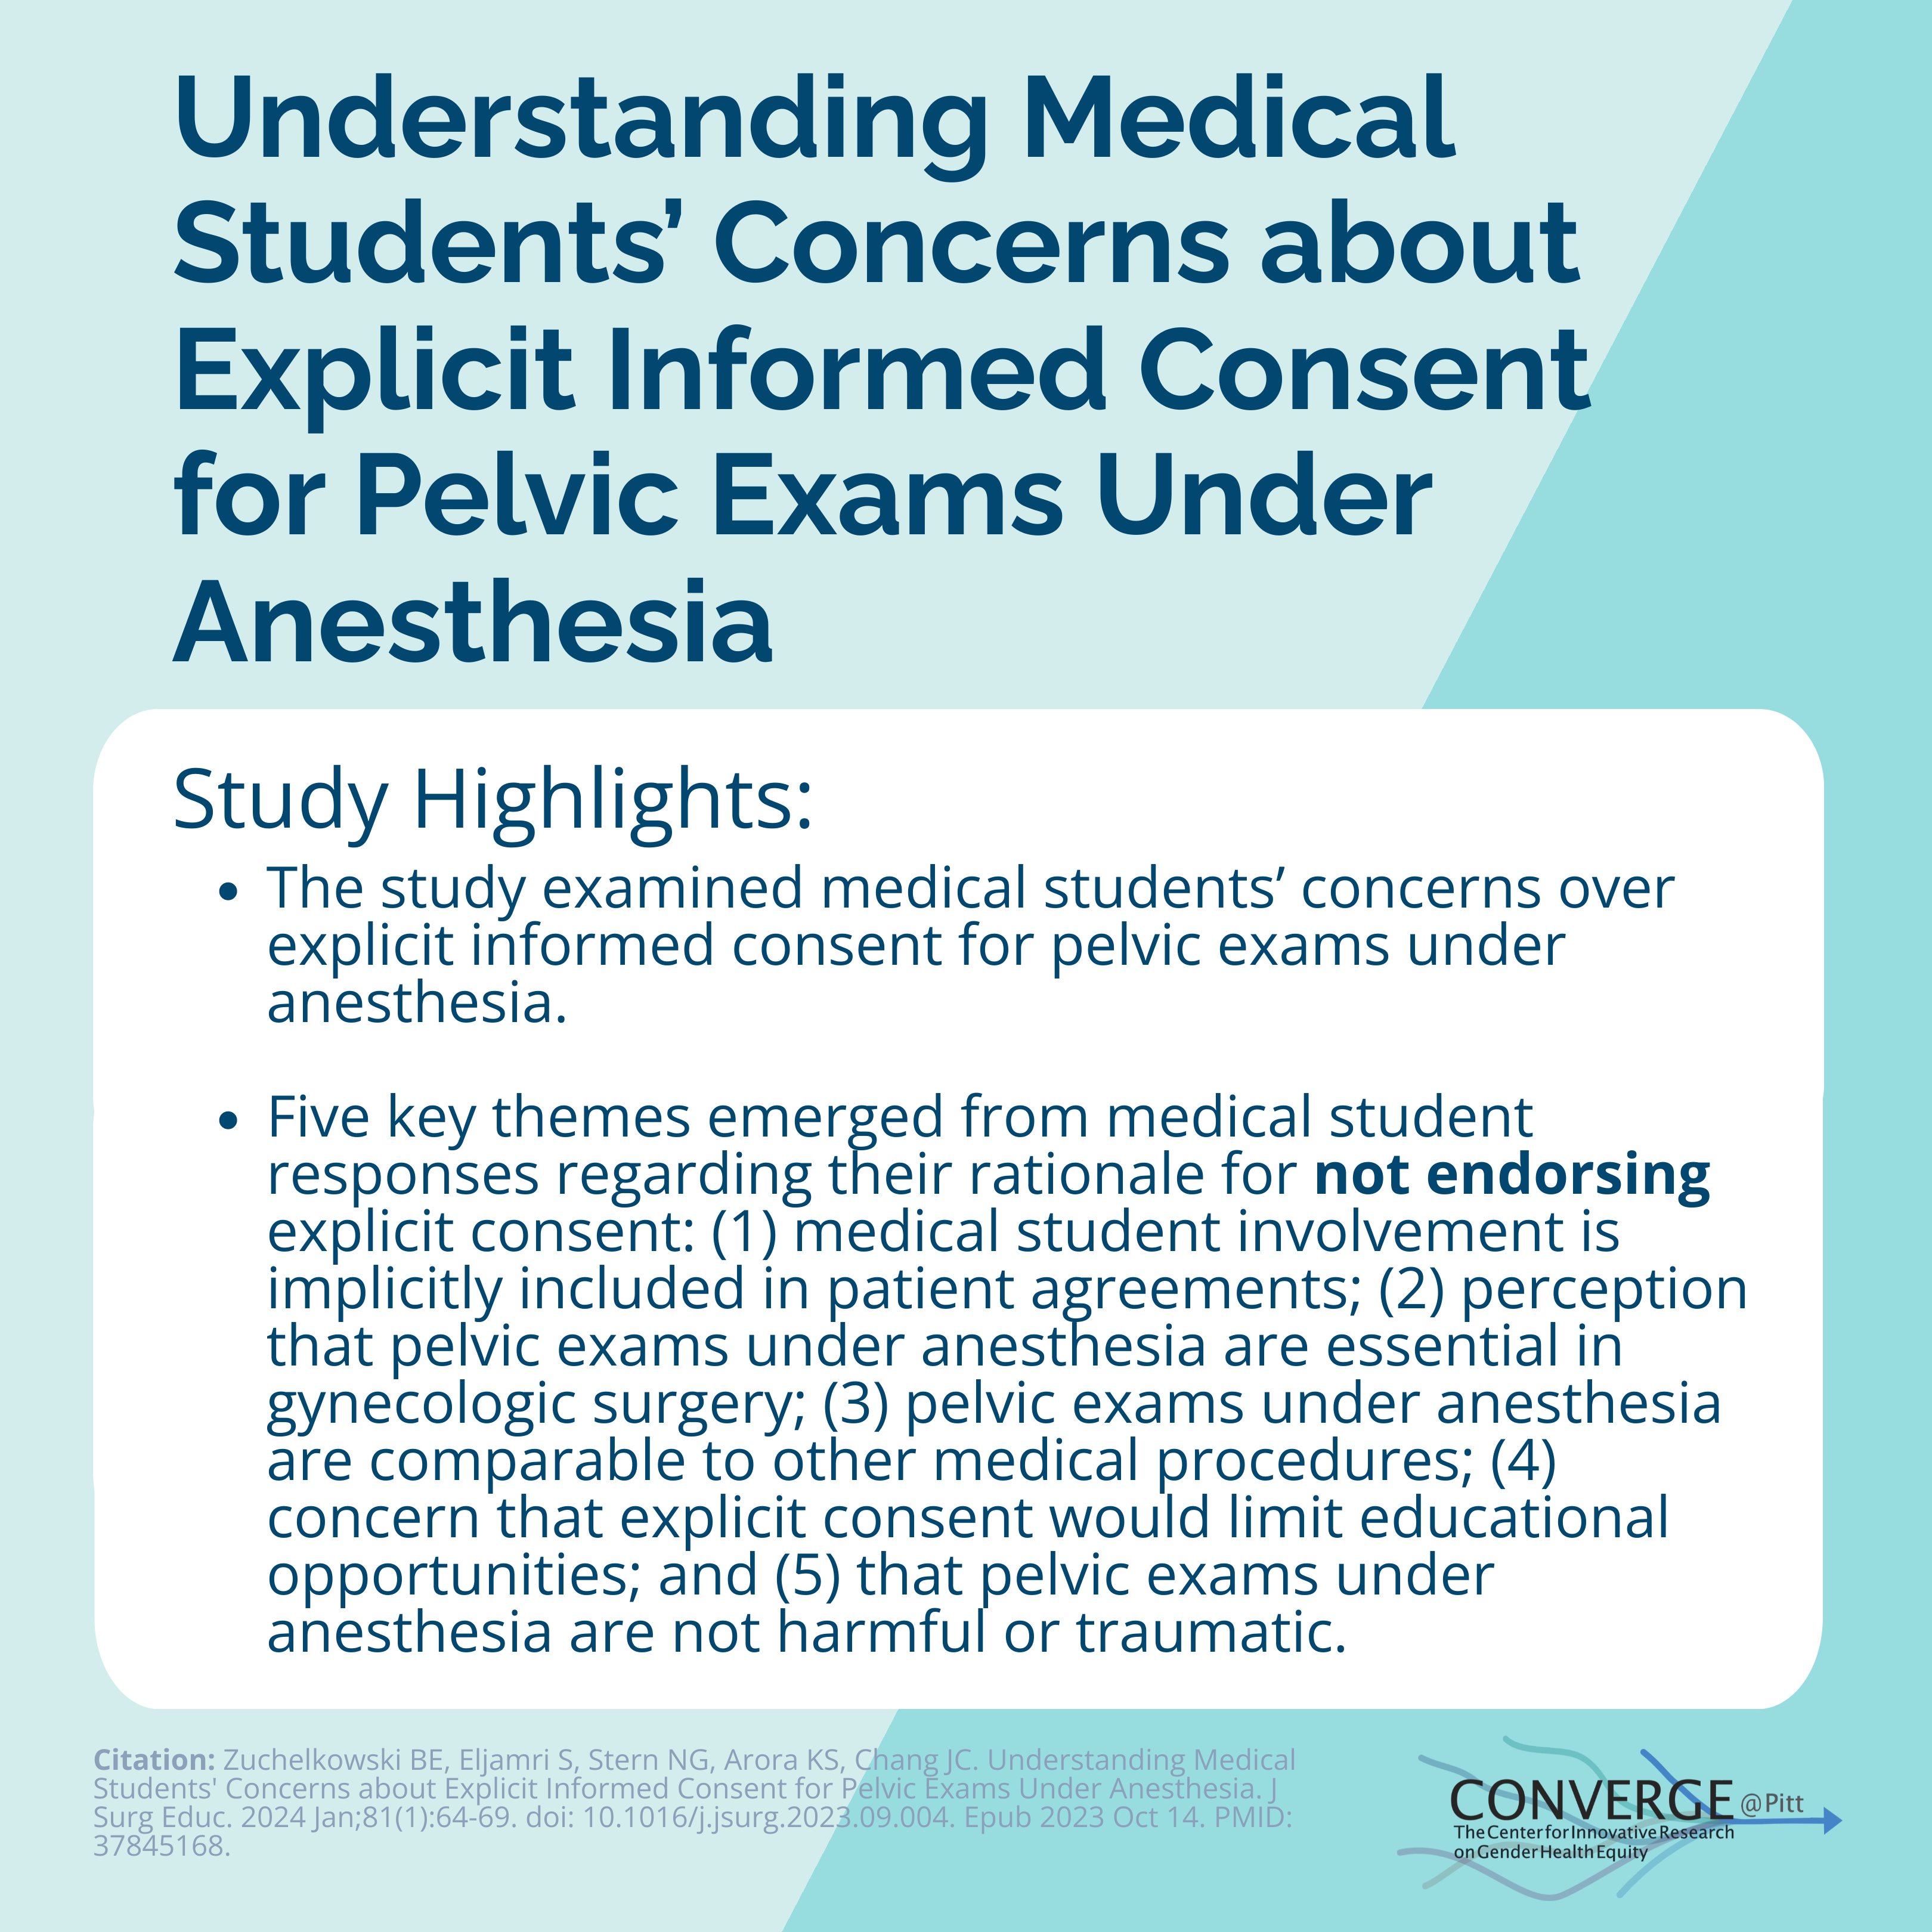 Understanding Medical Students' Concerns about Explicit Informed Consent for Pelvic Exams Under Anesthesia